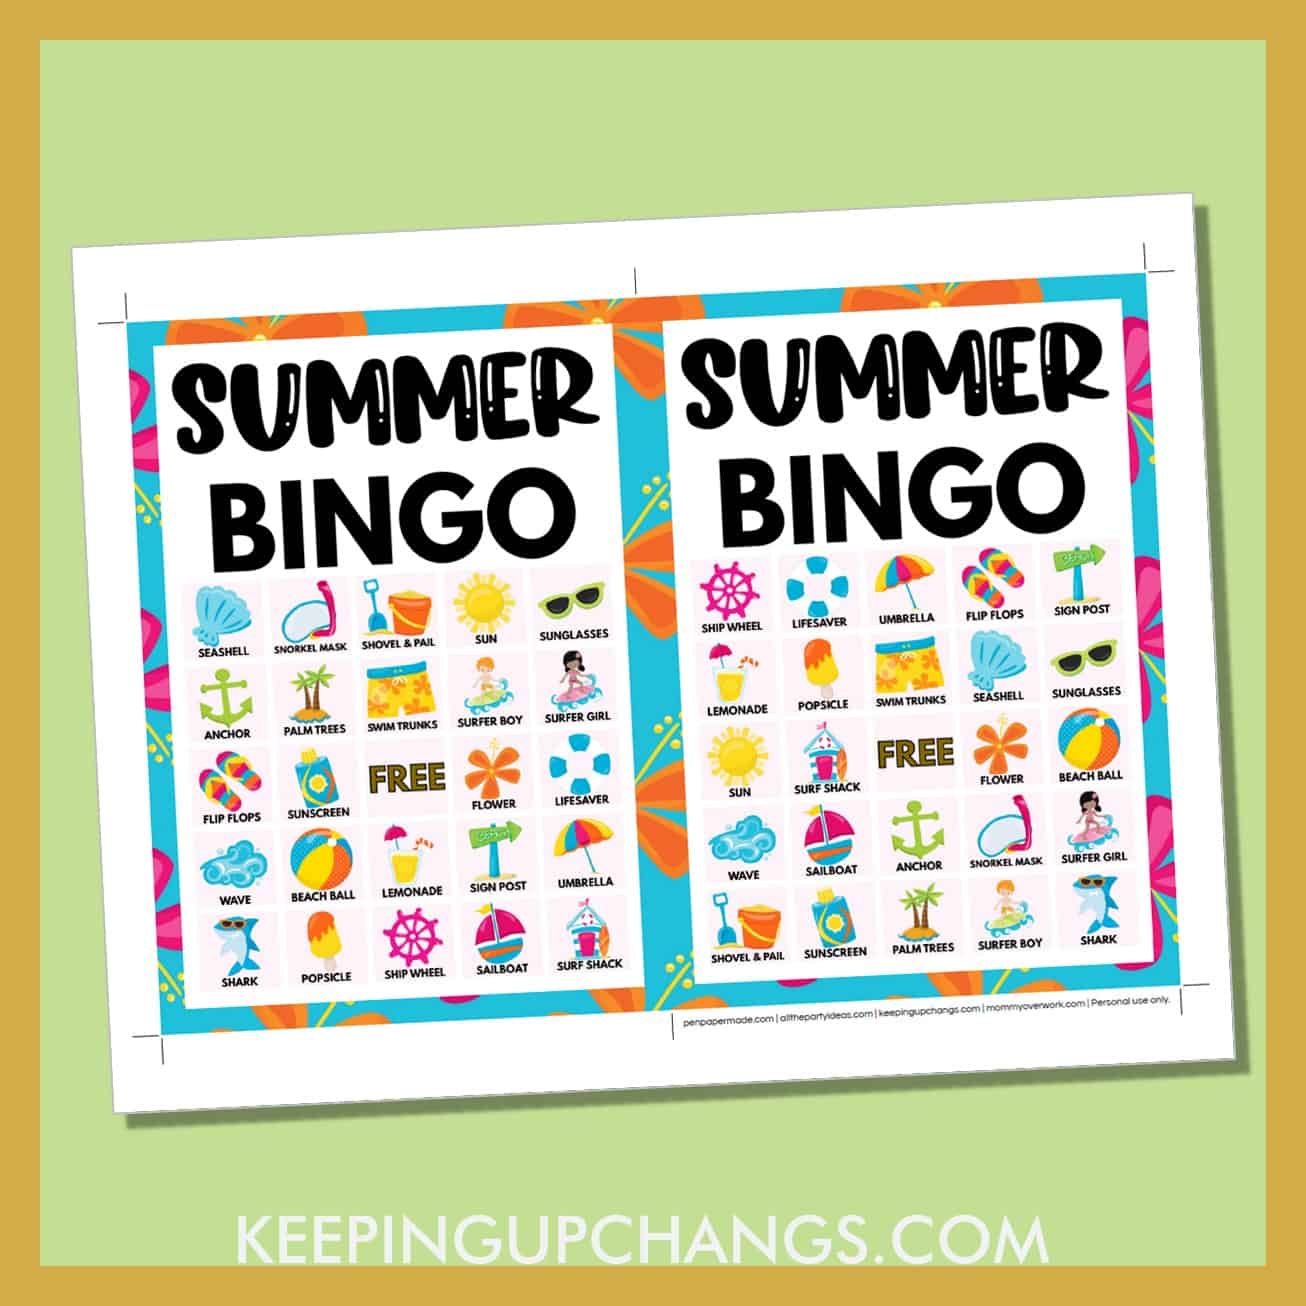 free summer beach bingo card 5x5 5x7 game boards with images and text words.